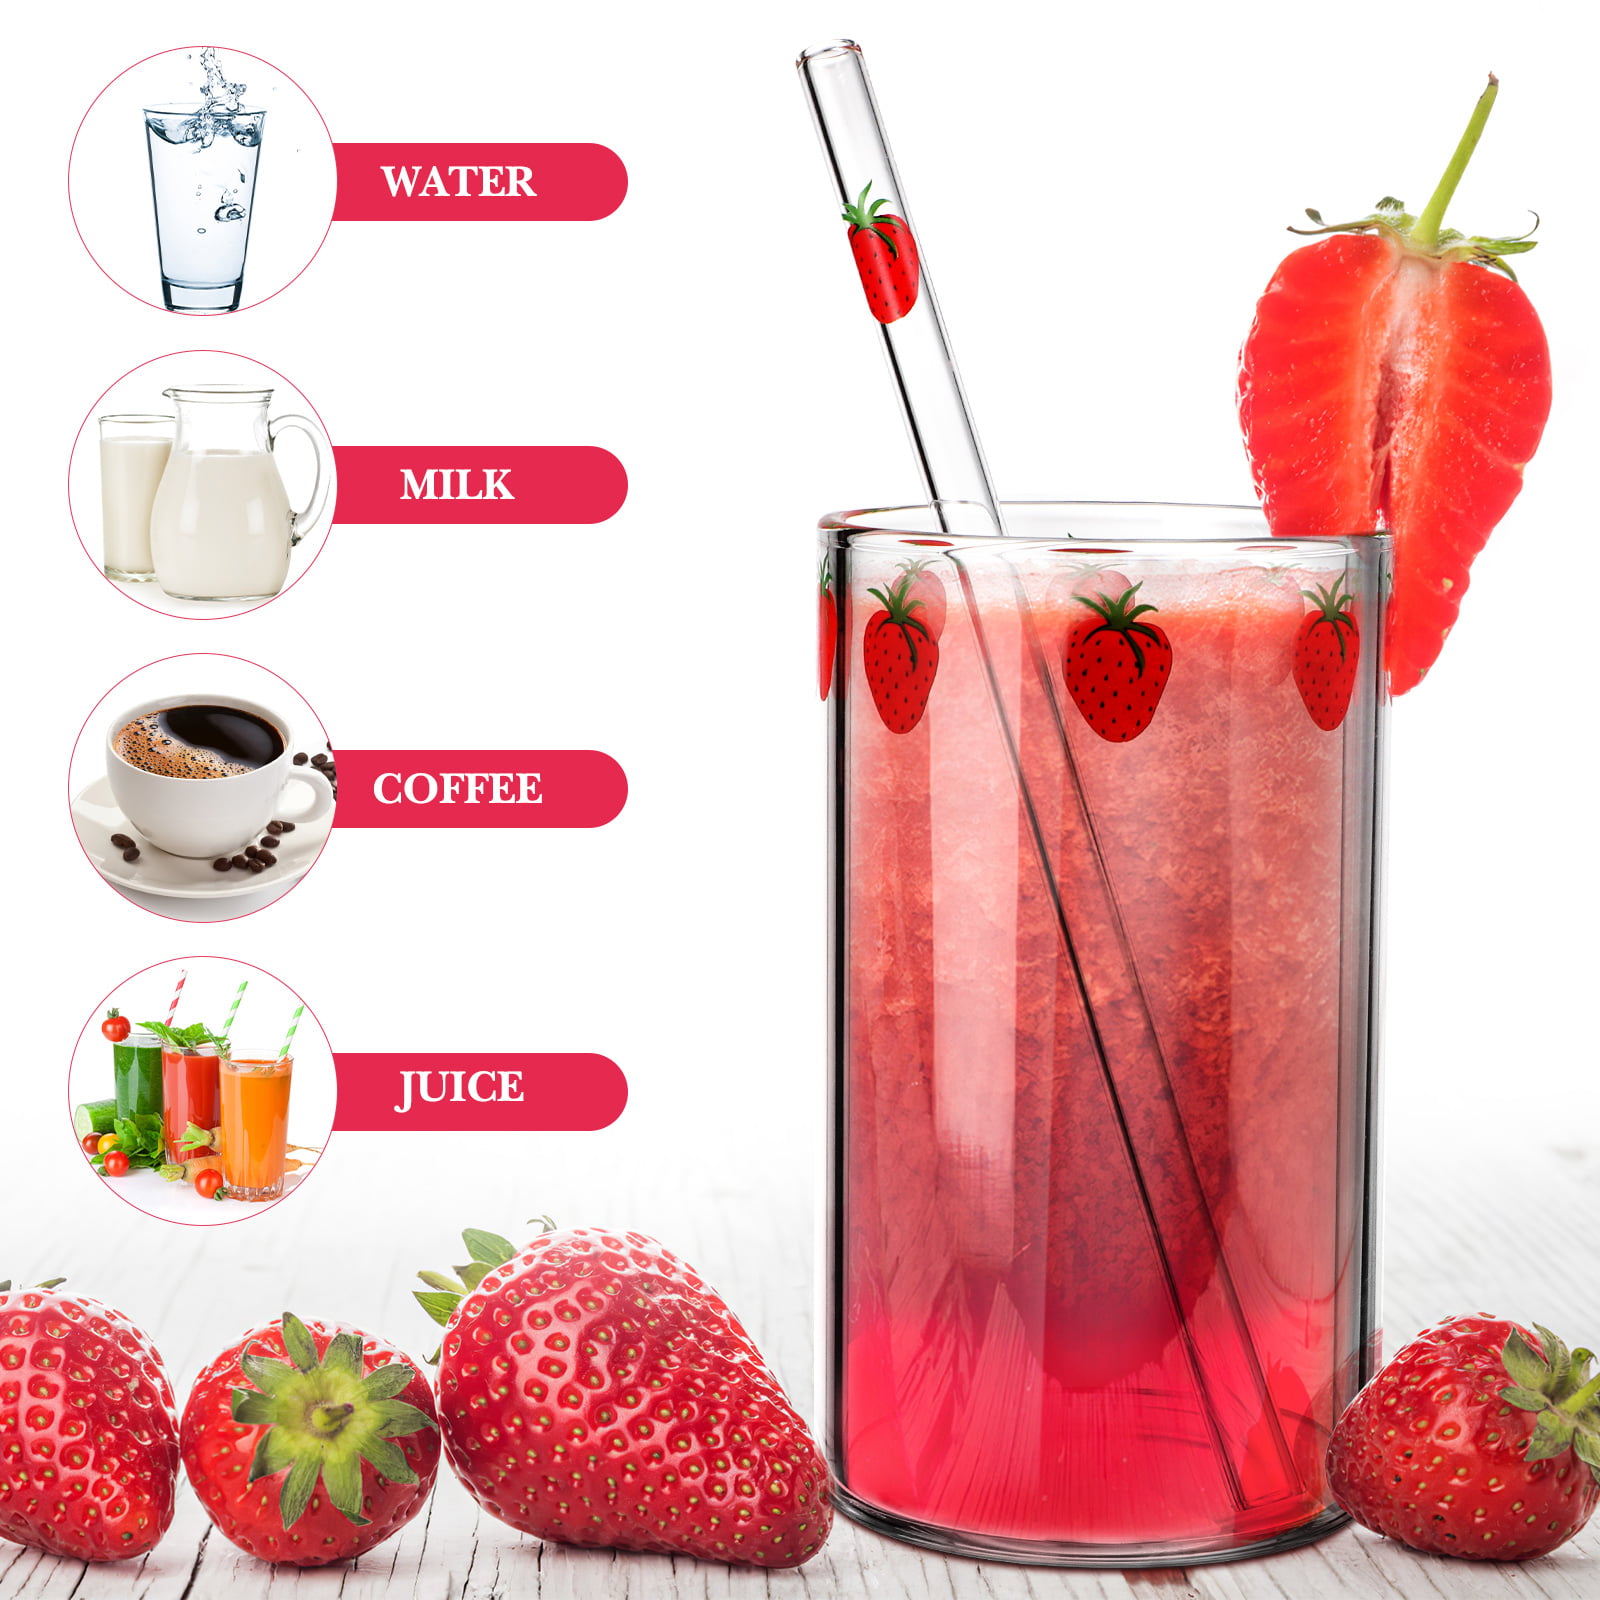 Ipetboom 1 Set Strawberry Clear Glass Mug with Straws, 300ML Glass Cup  Drinking Glasses Drinking Cup…See more Ipetboom 1 Set Strawberry Clear  Glass